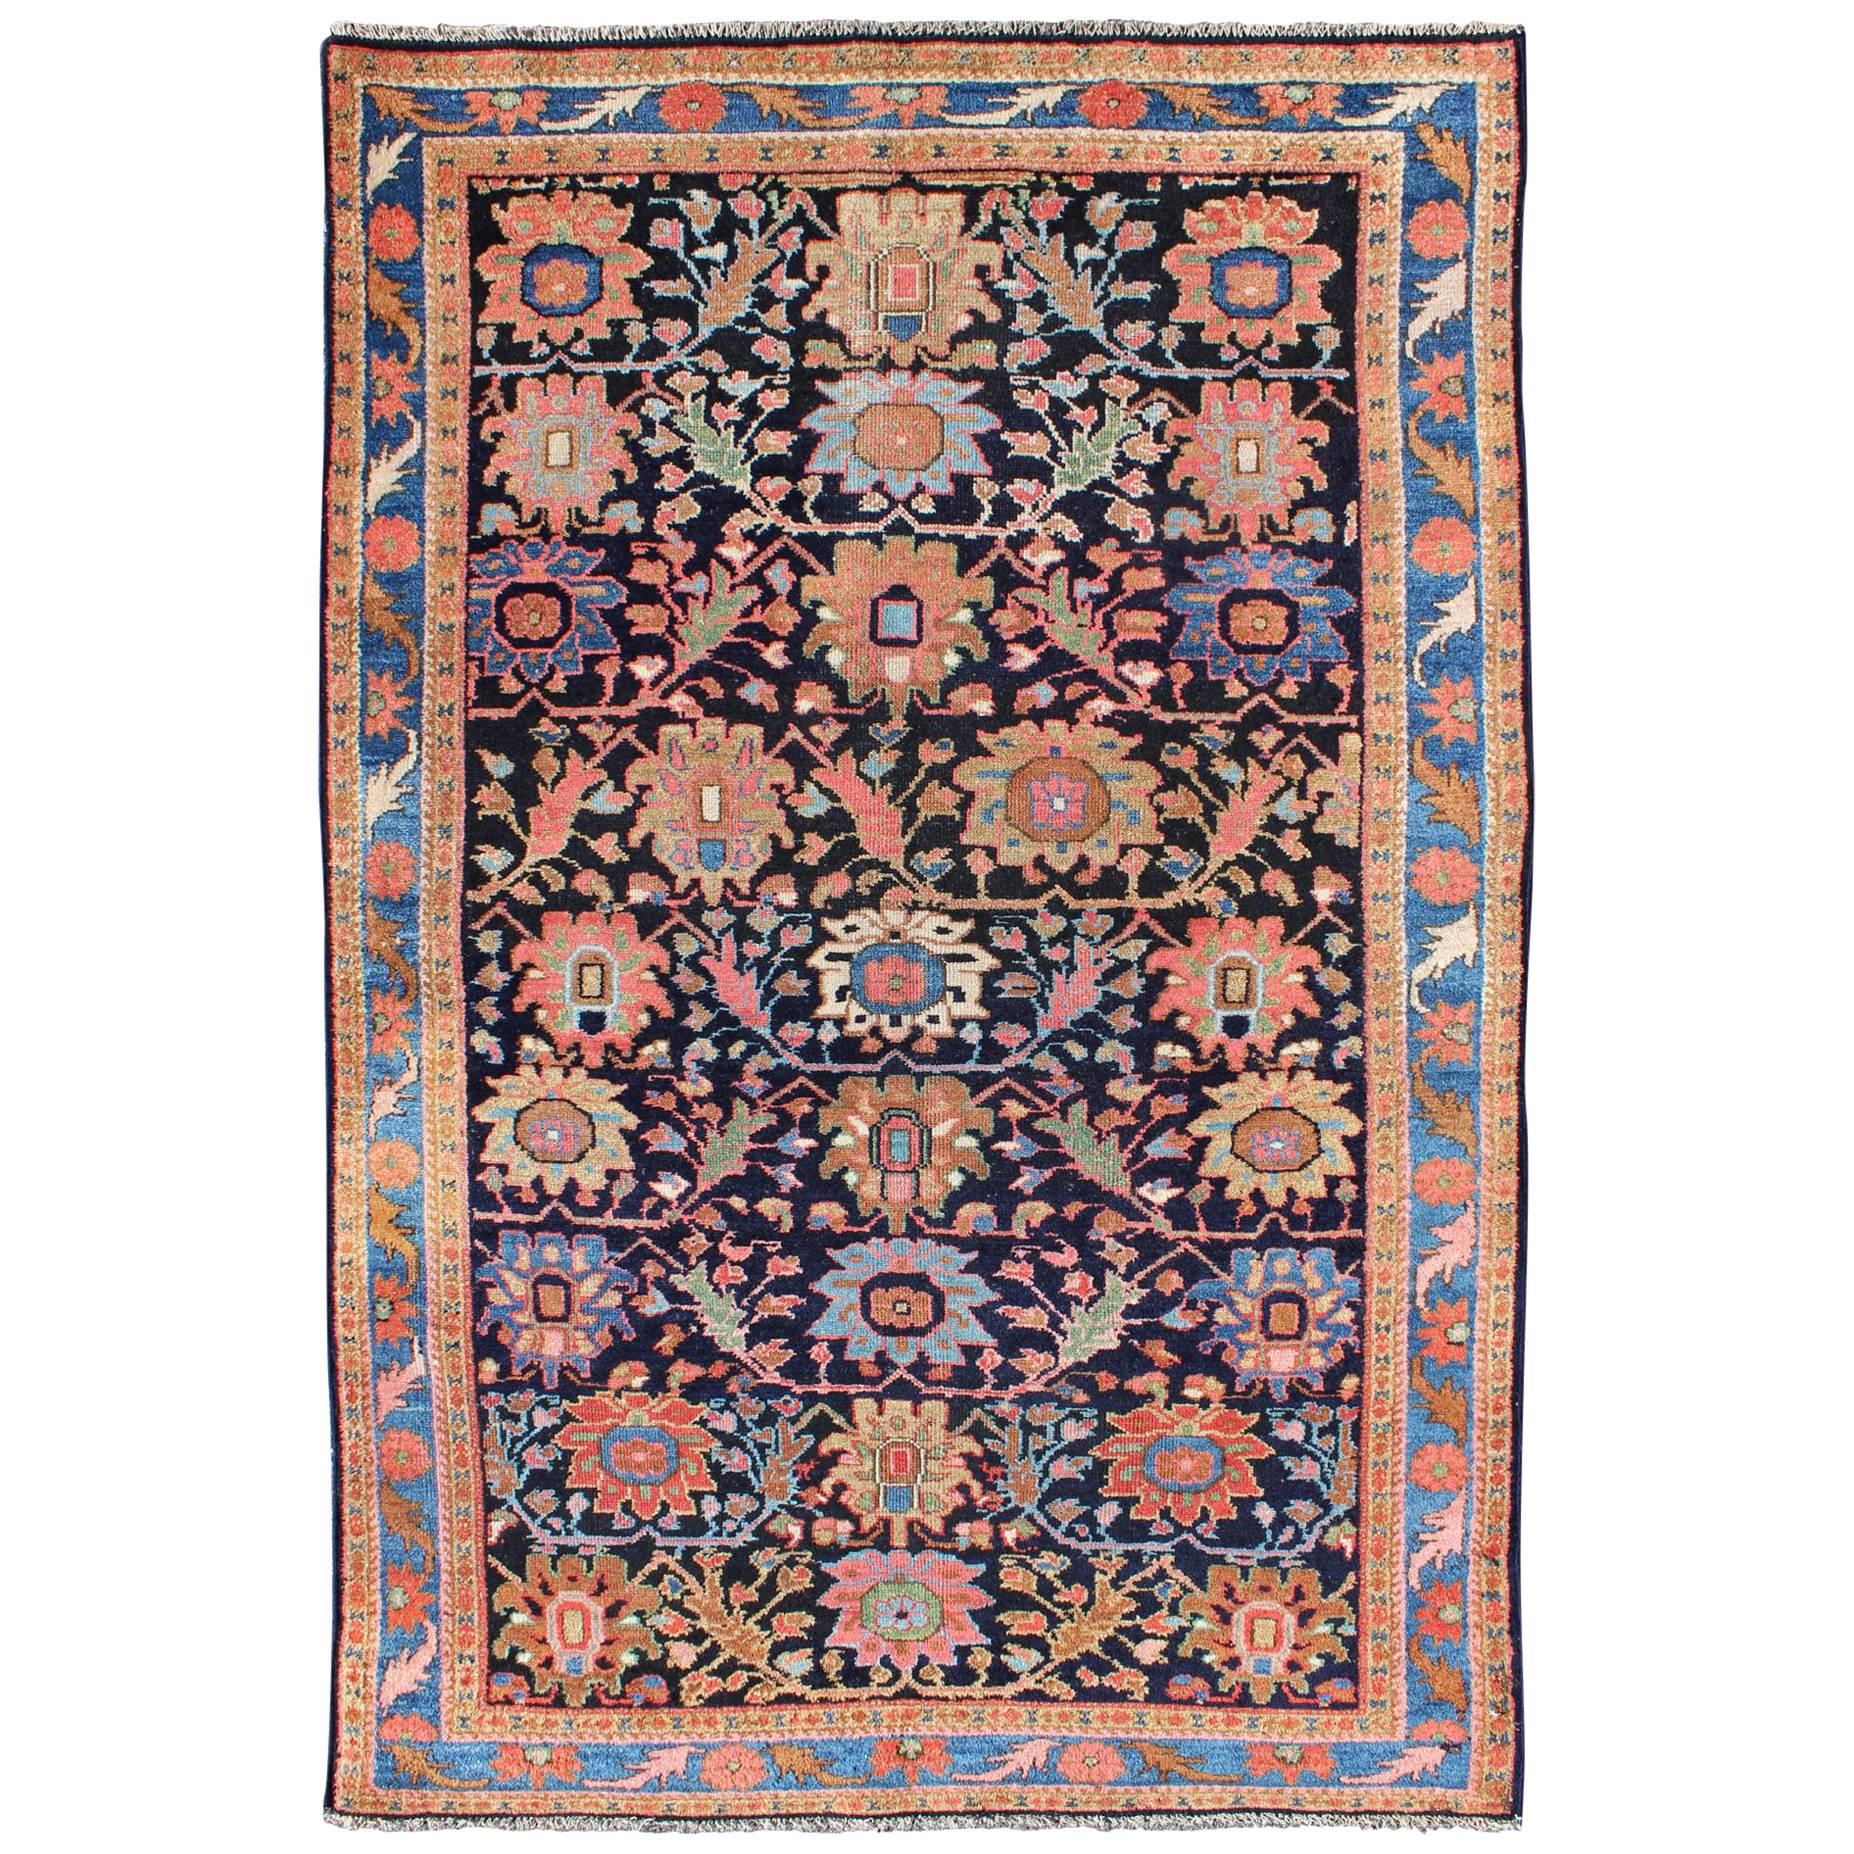 Antique Persian Malayer Rug with Large Floral Motifs in Navy and Multi Colors